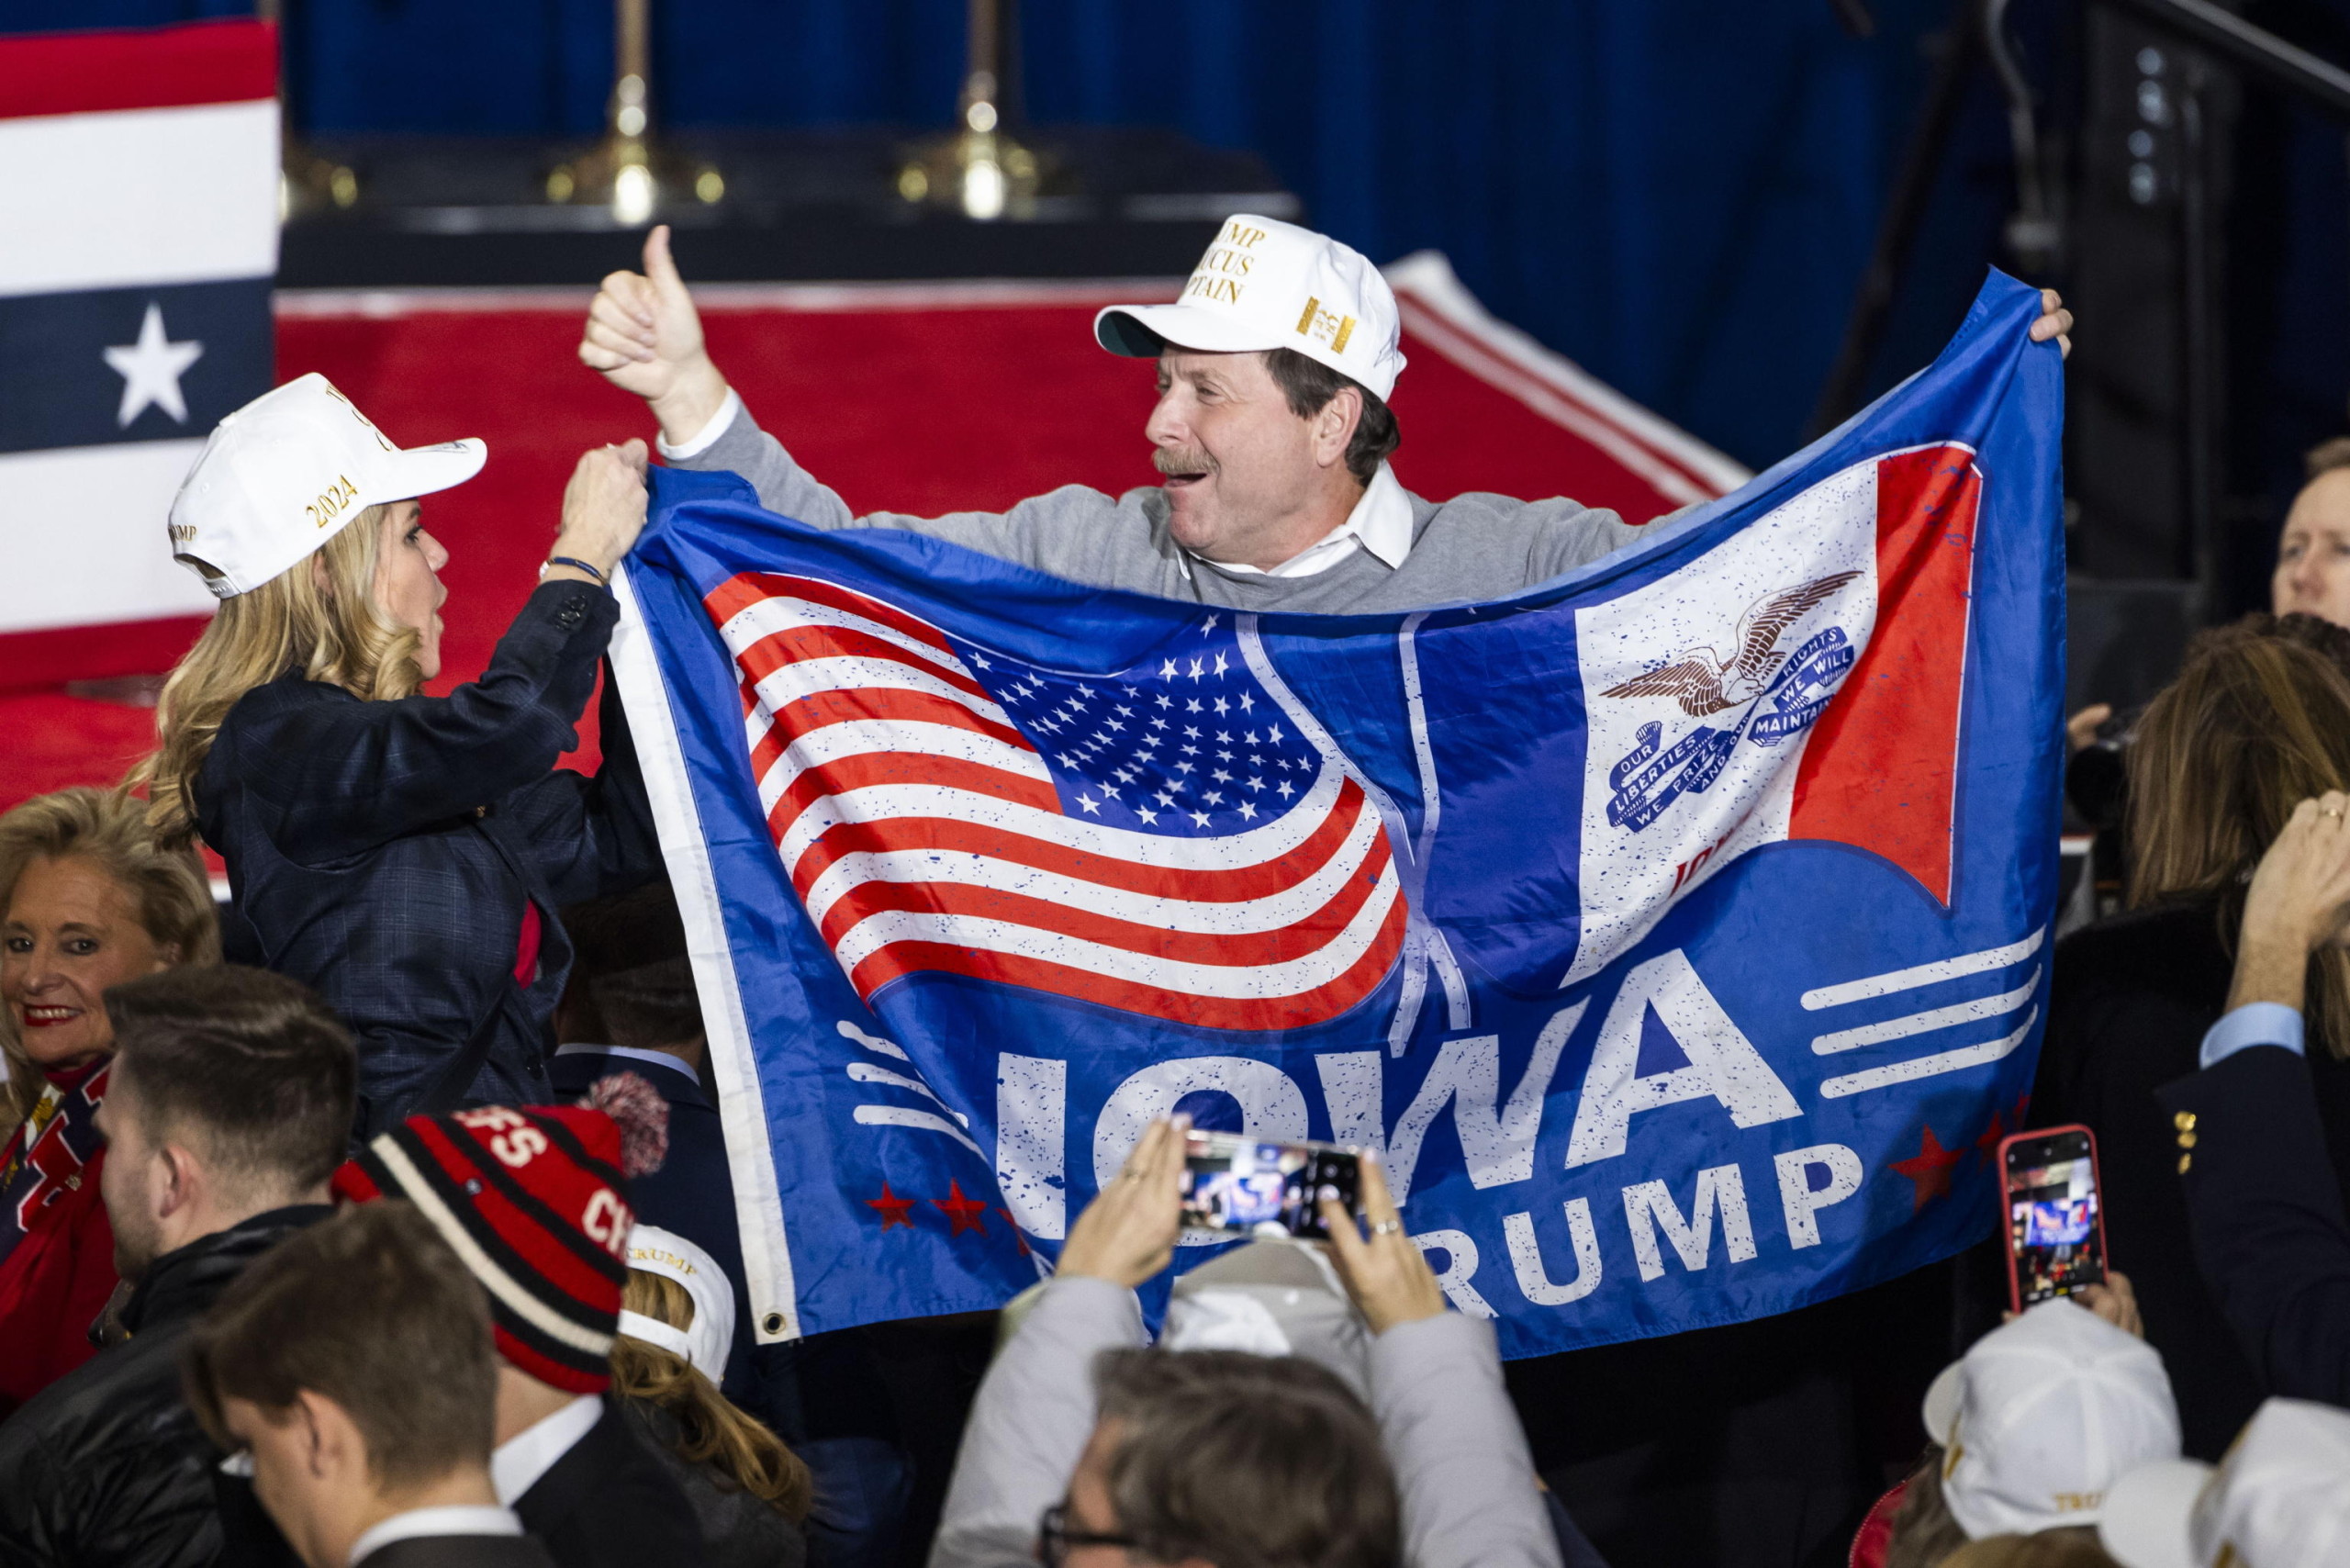 epa11081149 Supporters of former President Donald Trump wait for him to speak at the Iowa Events Center after Trump won the first-in-the-nation Iowa caucus in Des Moines, Iowa, USA, 15 January 2024. Trump won the state handily, defeating former South Carolina Governor Nikki Haley and Florida Governor Ron DeSantis. The Republican presidential race now moves to New Hampshire for that state's Republican primary on 23 January.  EPA/JIM LO SCALZO